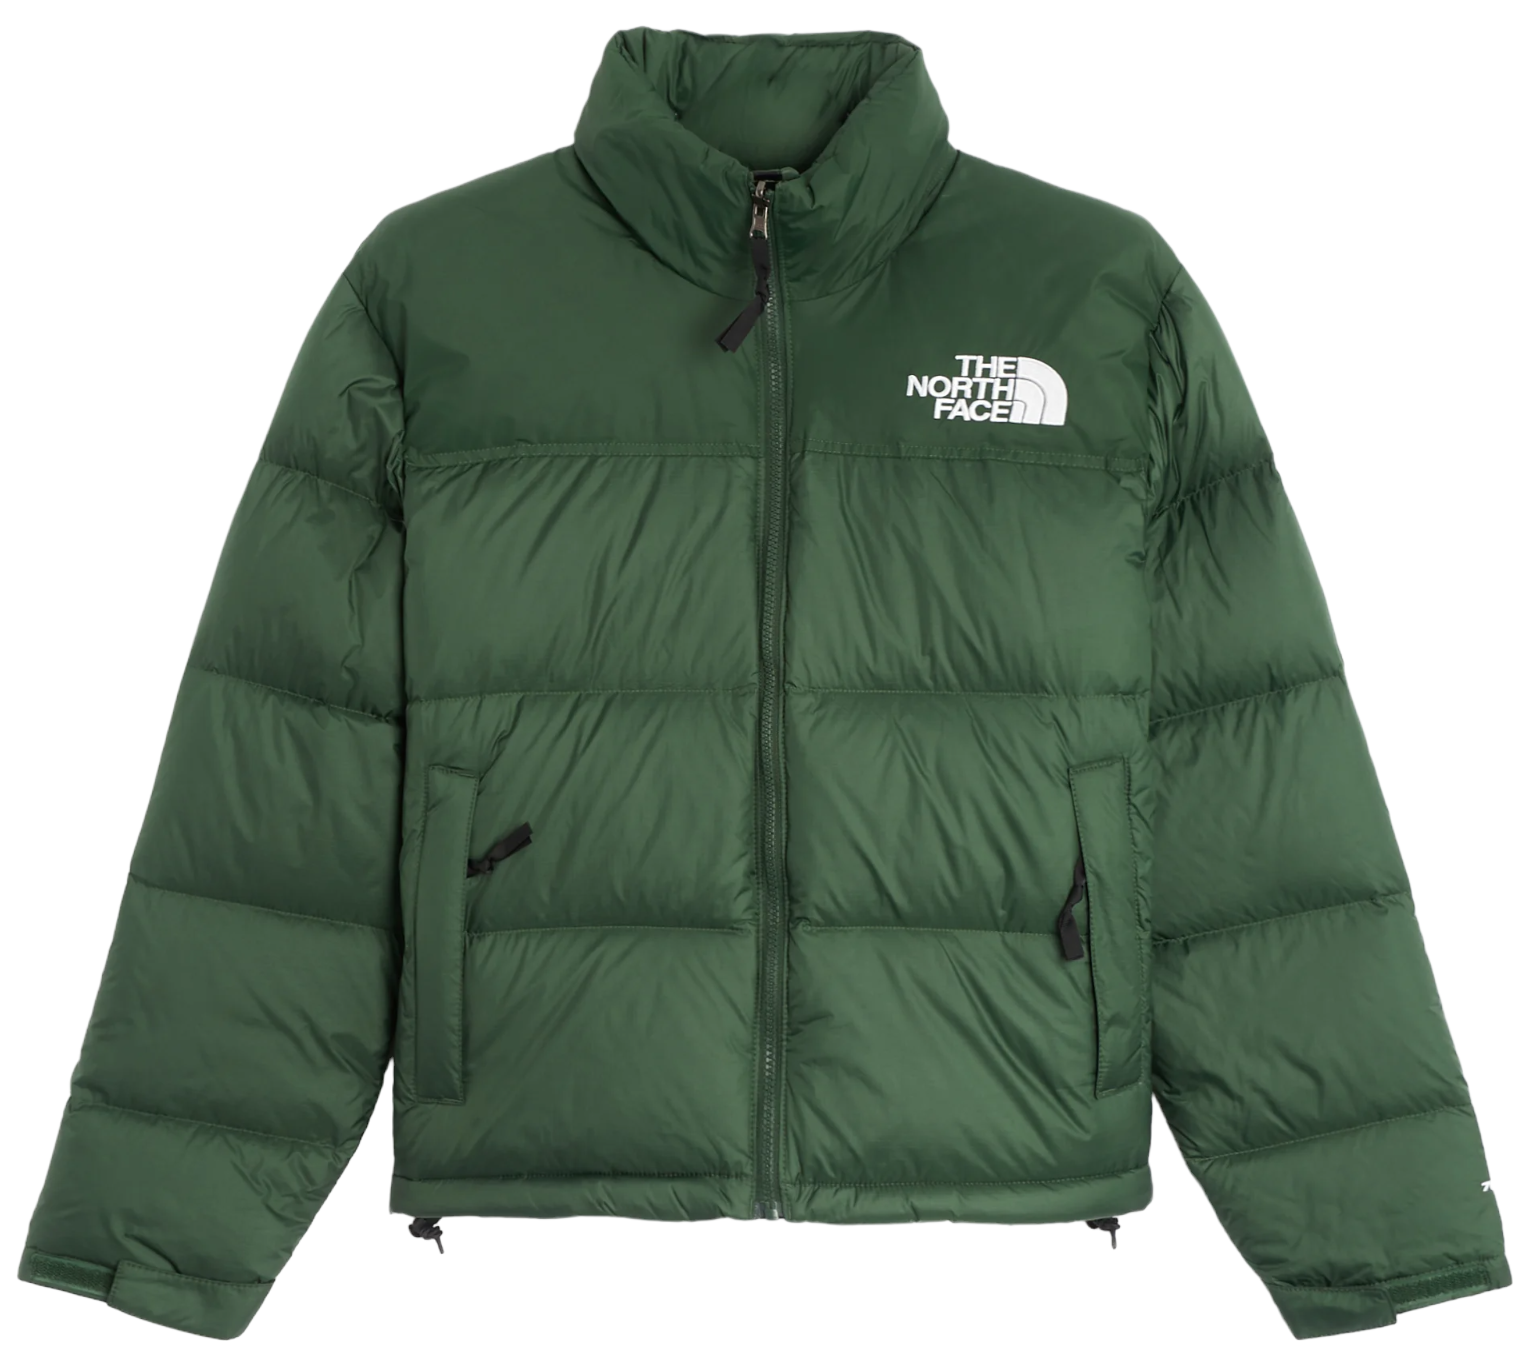 Hoodie The North Face 1996 Retro Jacket W